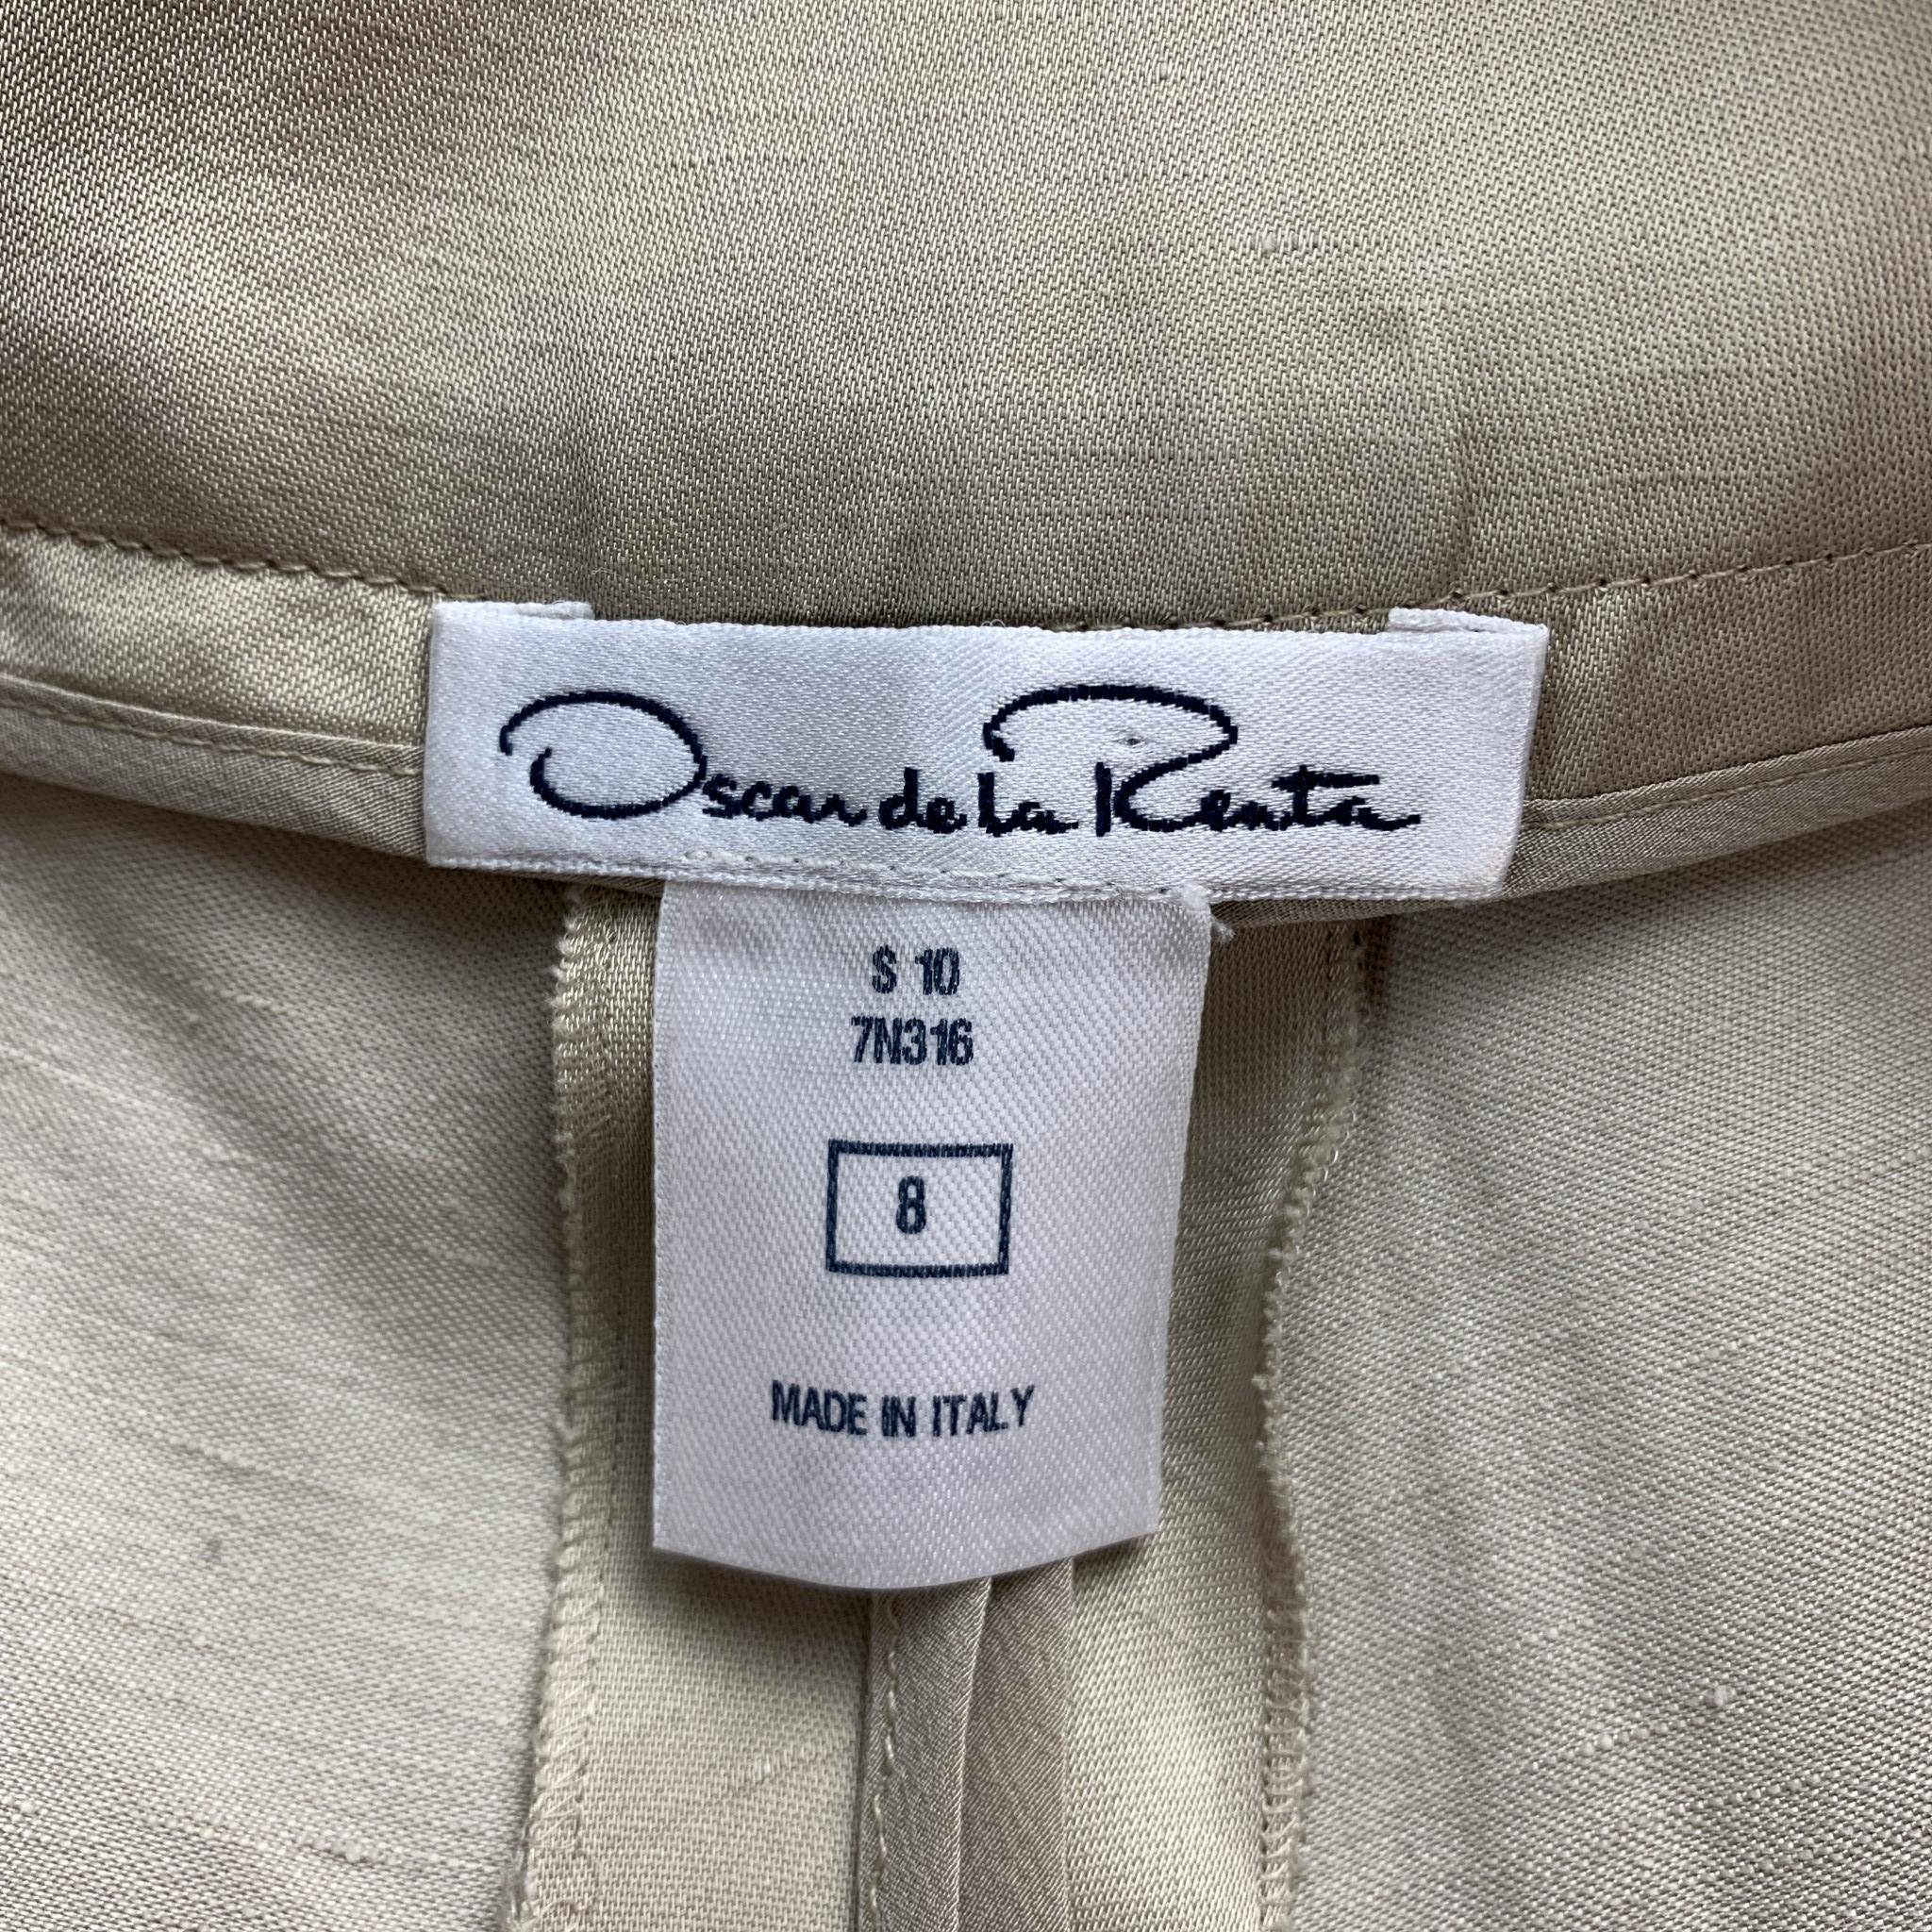 size 8 in mens pants